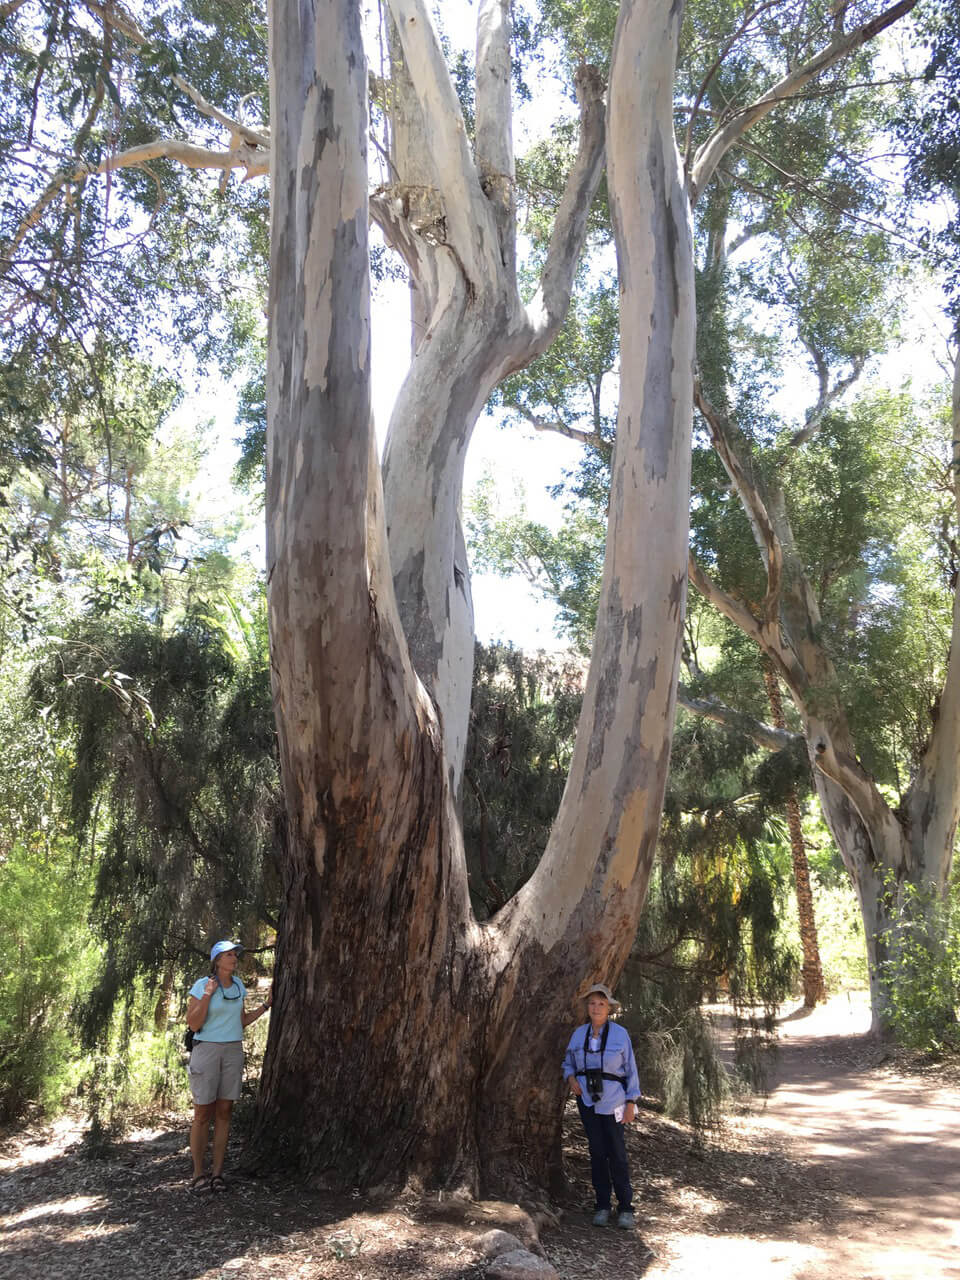 Arizona Champion Mr. Big is a red gum or longbreak eucalyptus the largest known tree of its species in the country